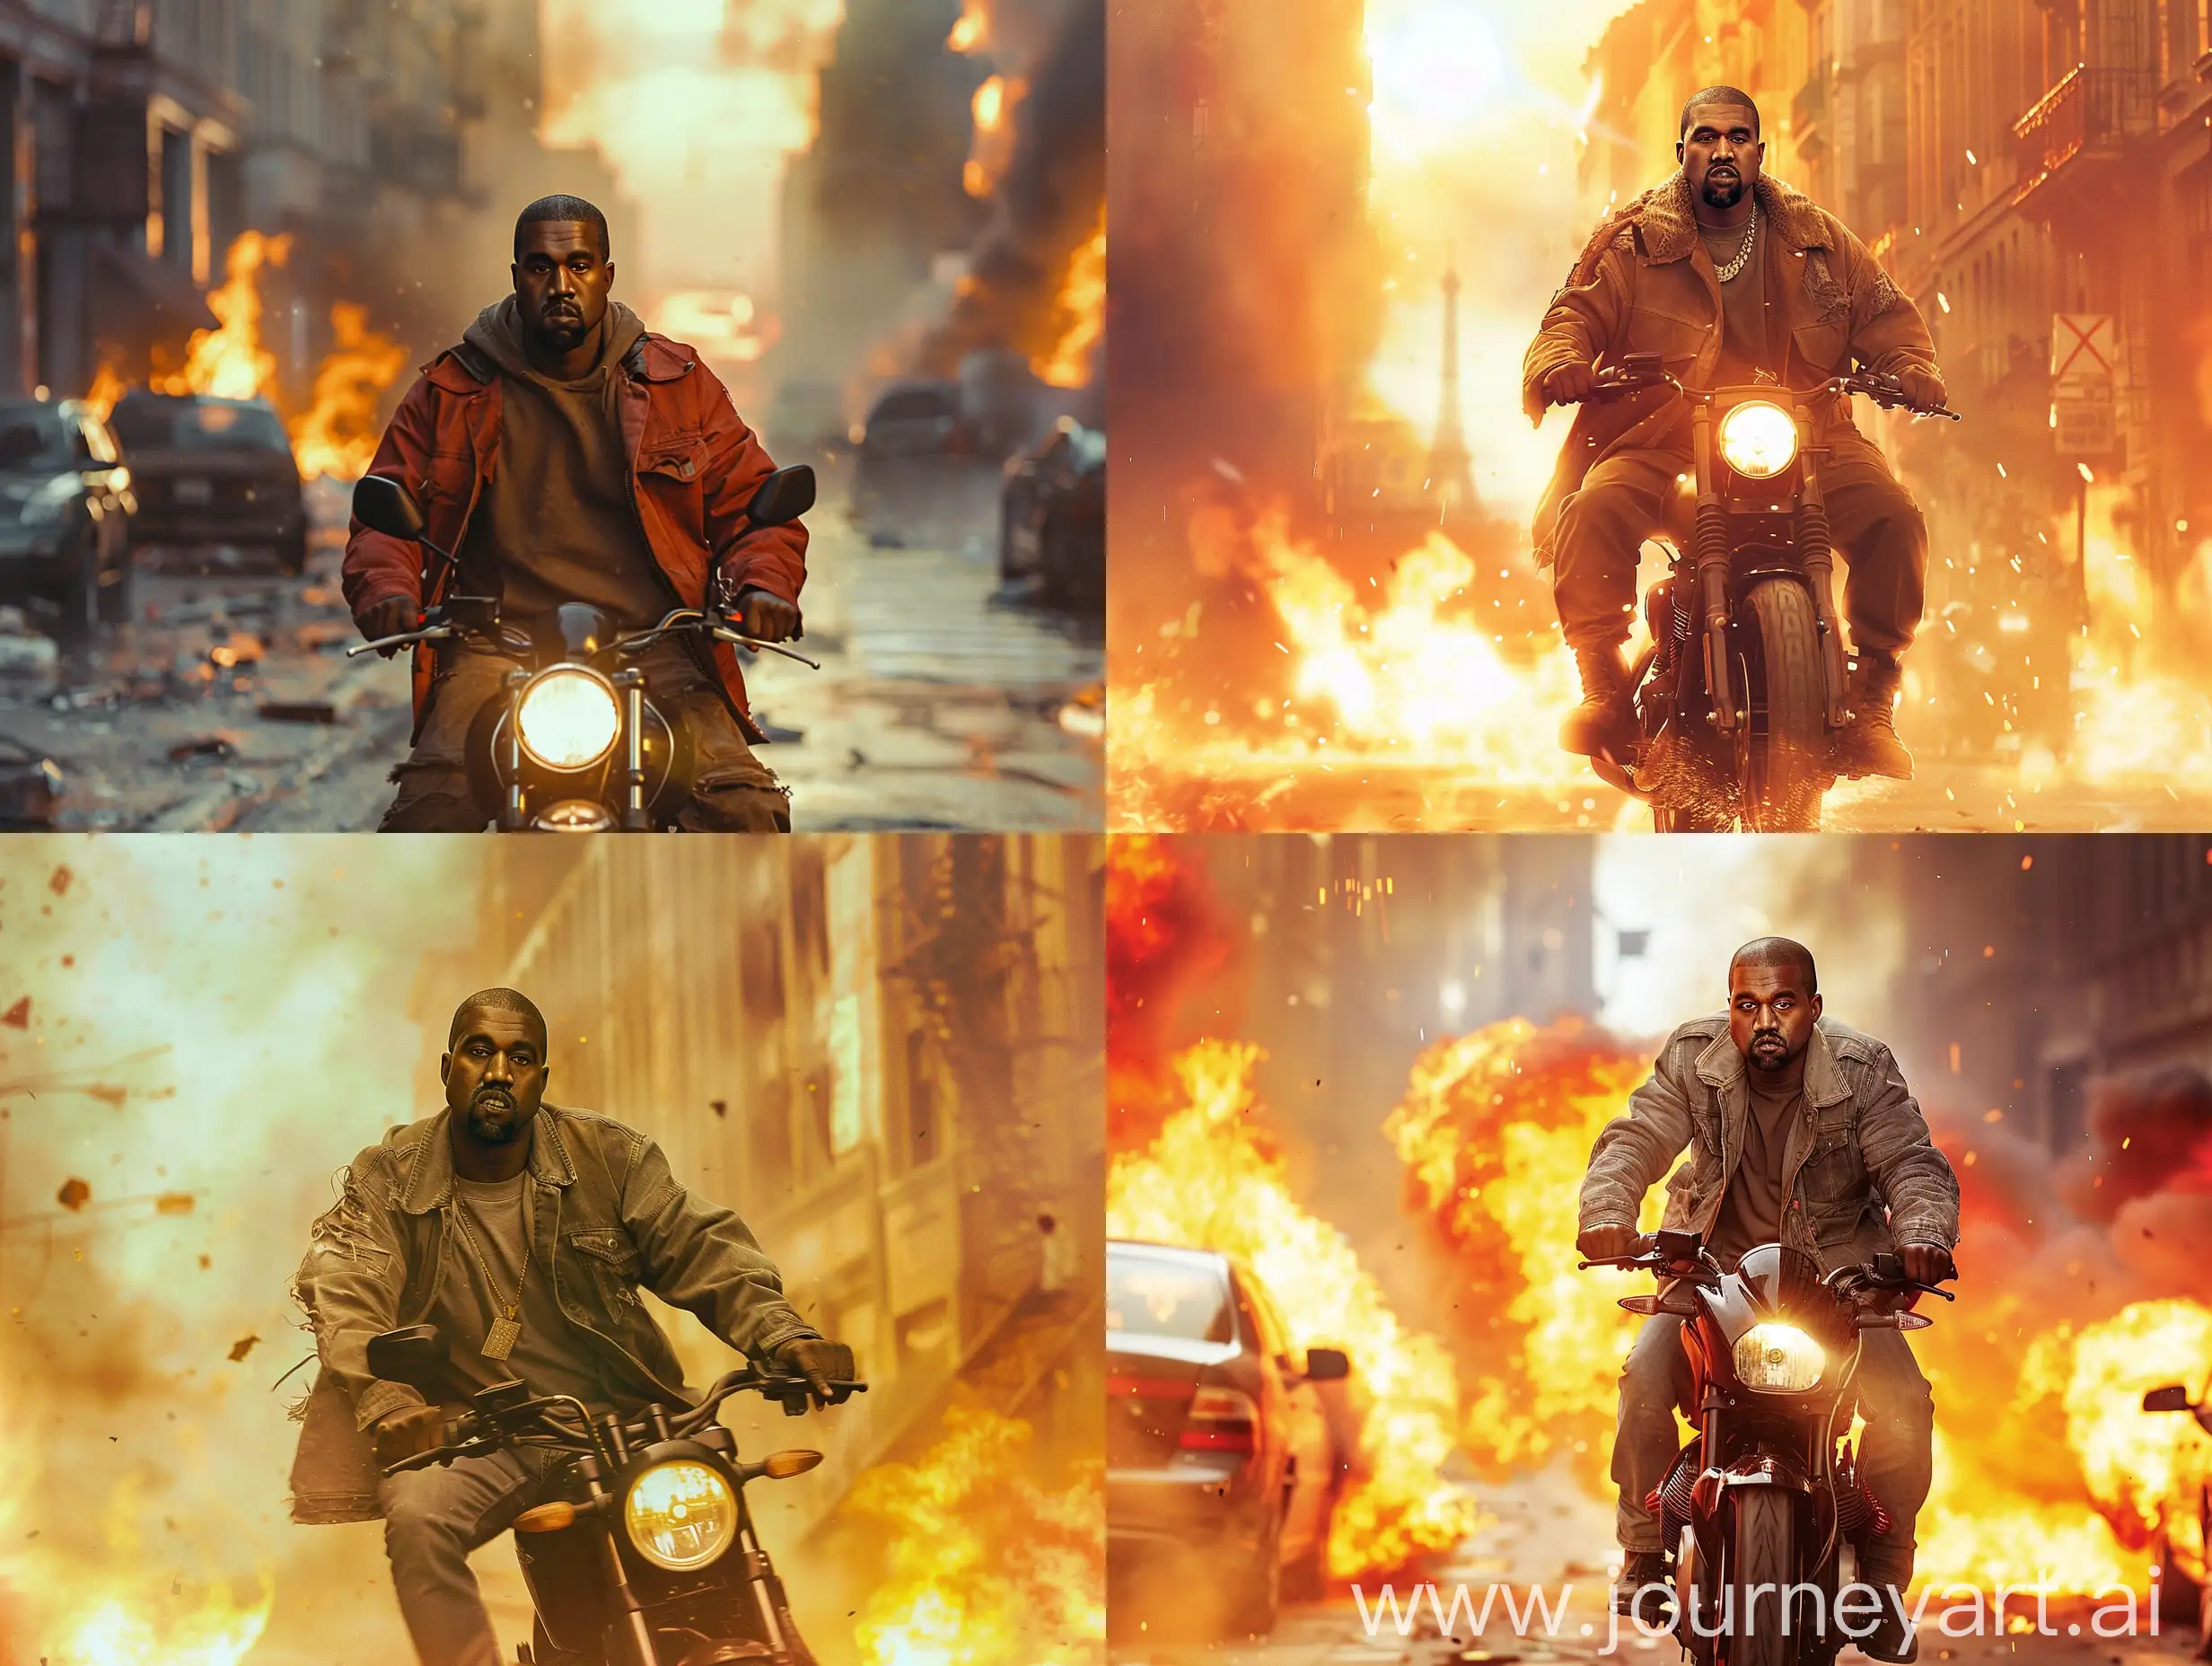 A photo of the rapper kanye west riding a motorbike escaping from a burning city